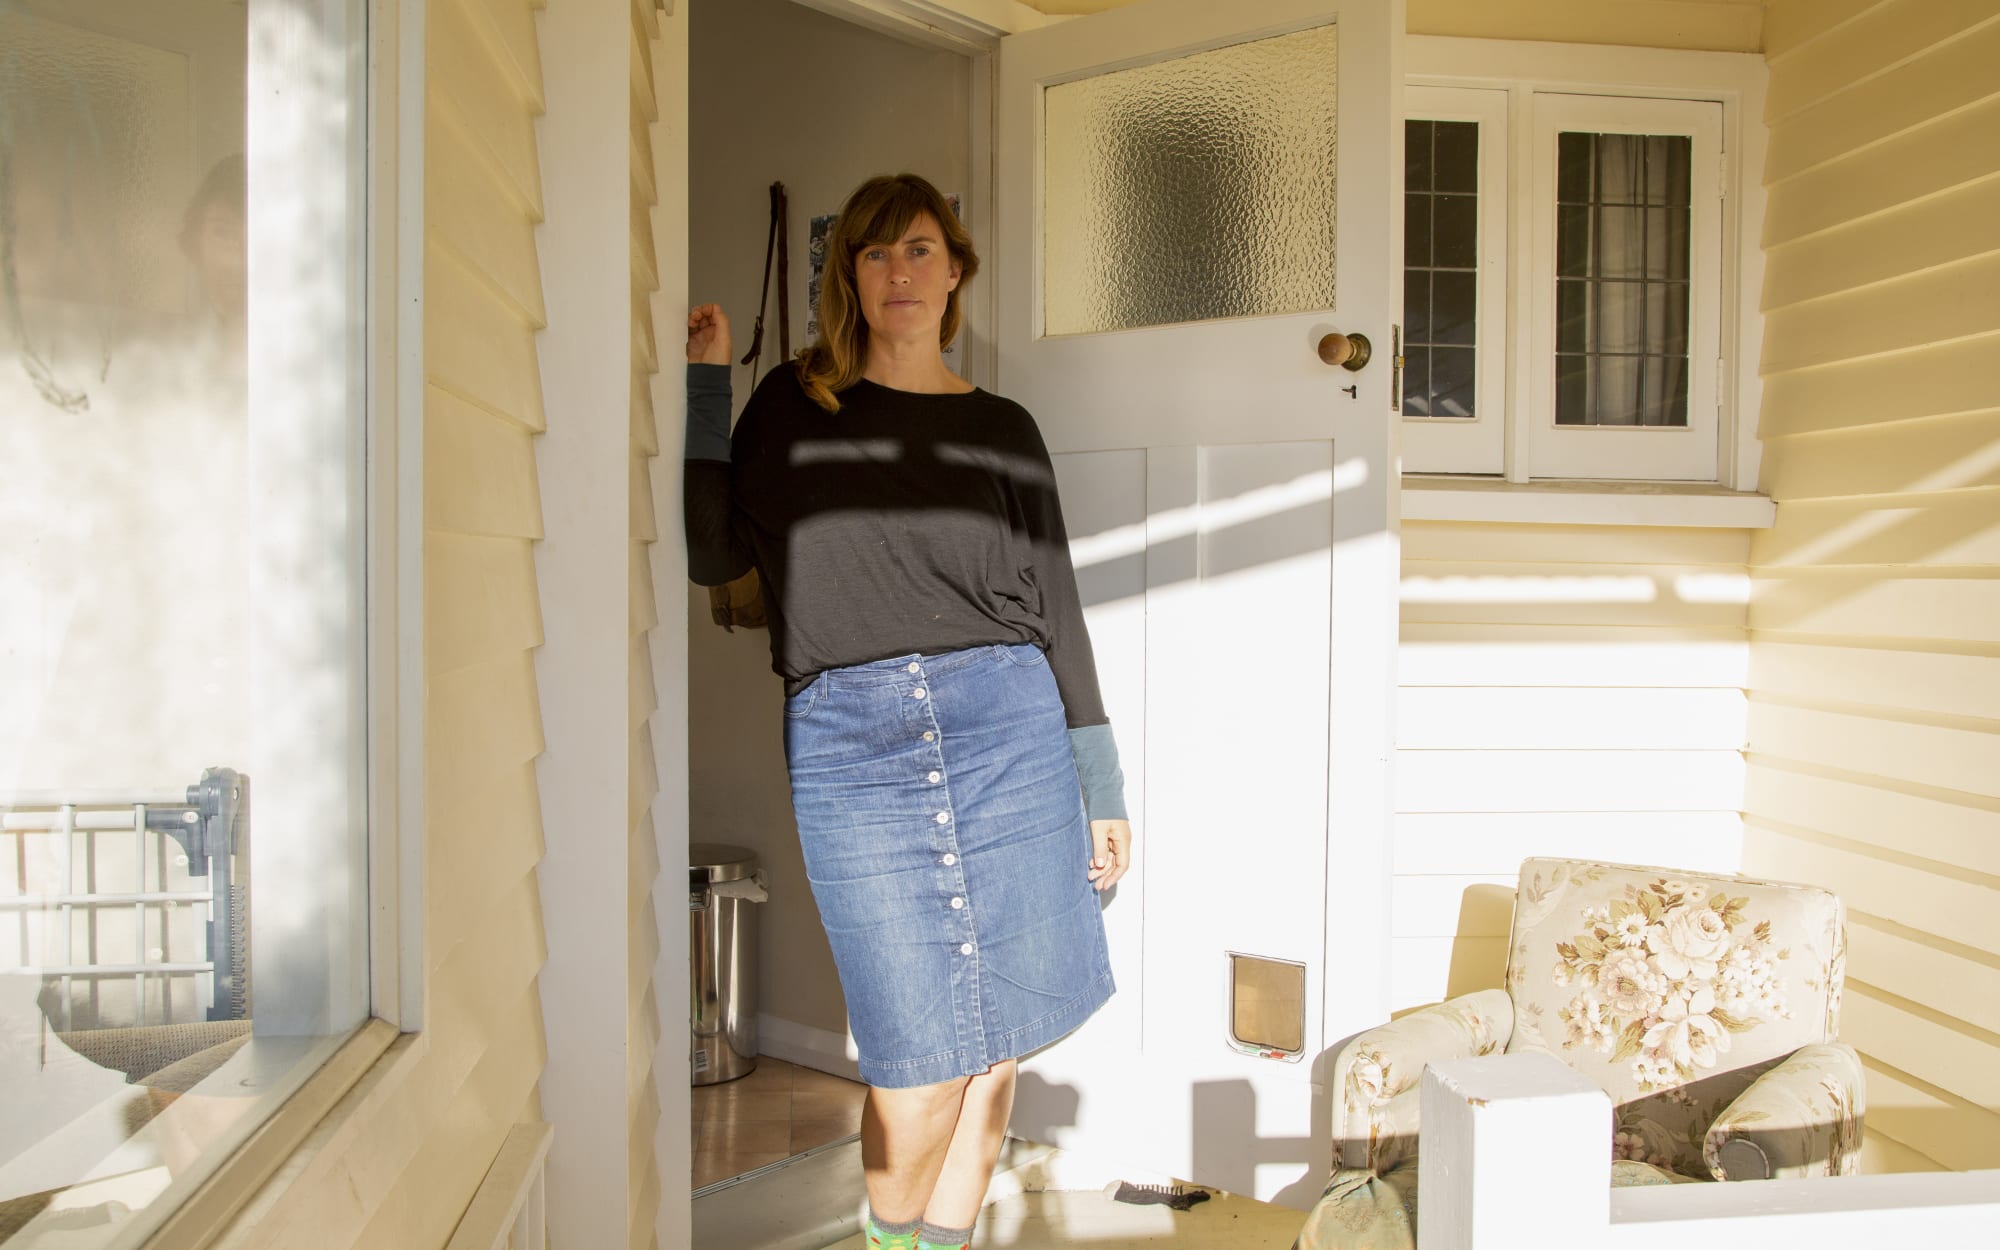 Portraits of people in lockdown. Victoria Vincent at her home during lockdown Level 3.